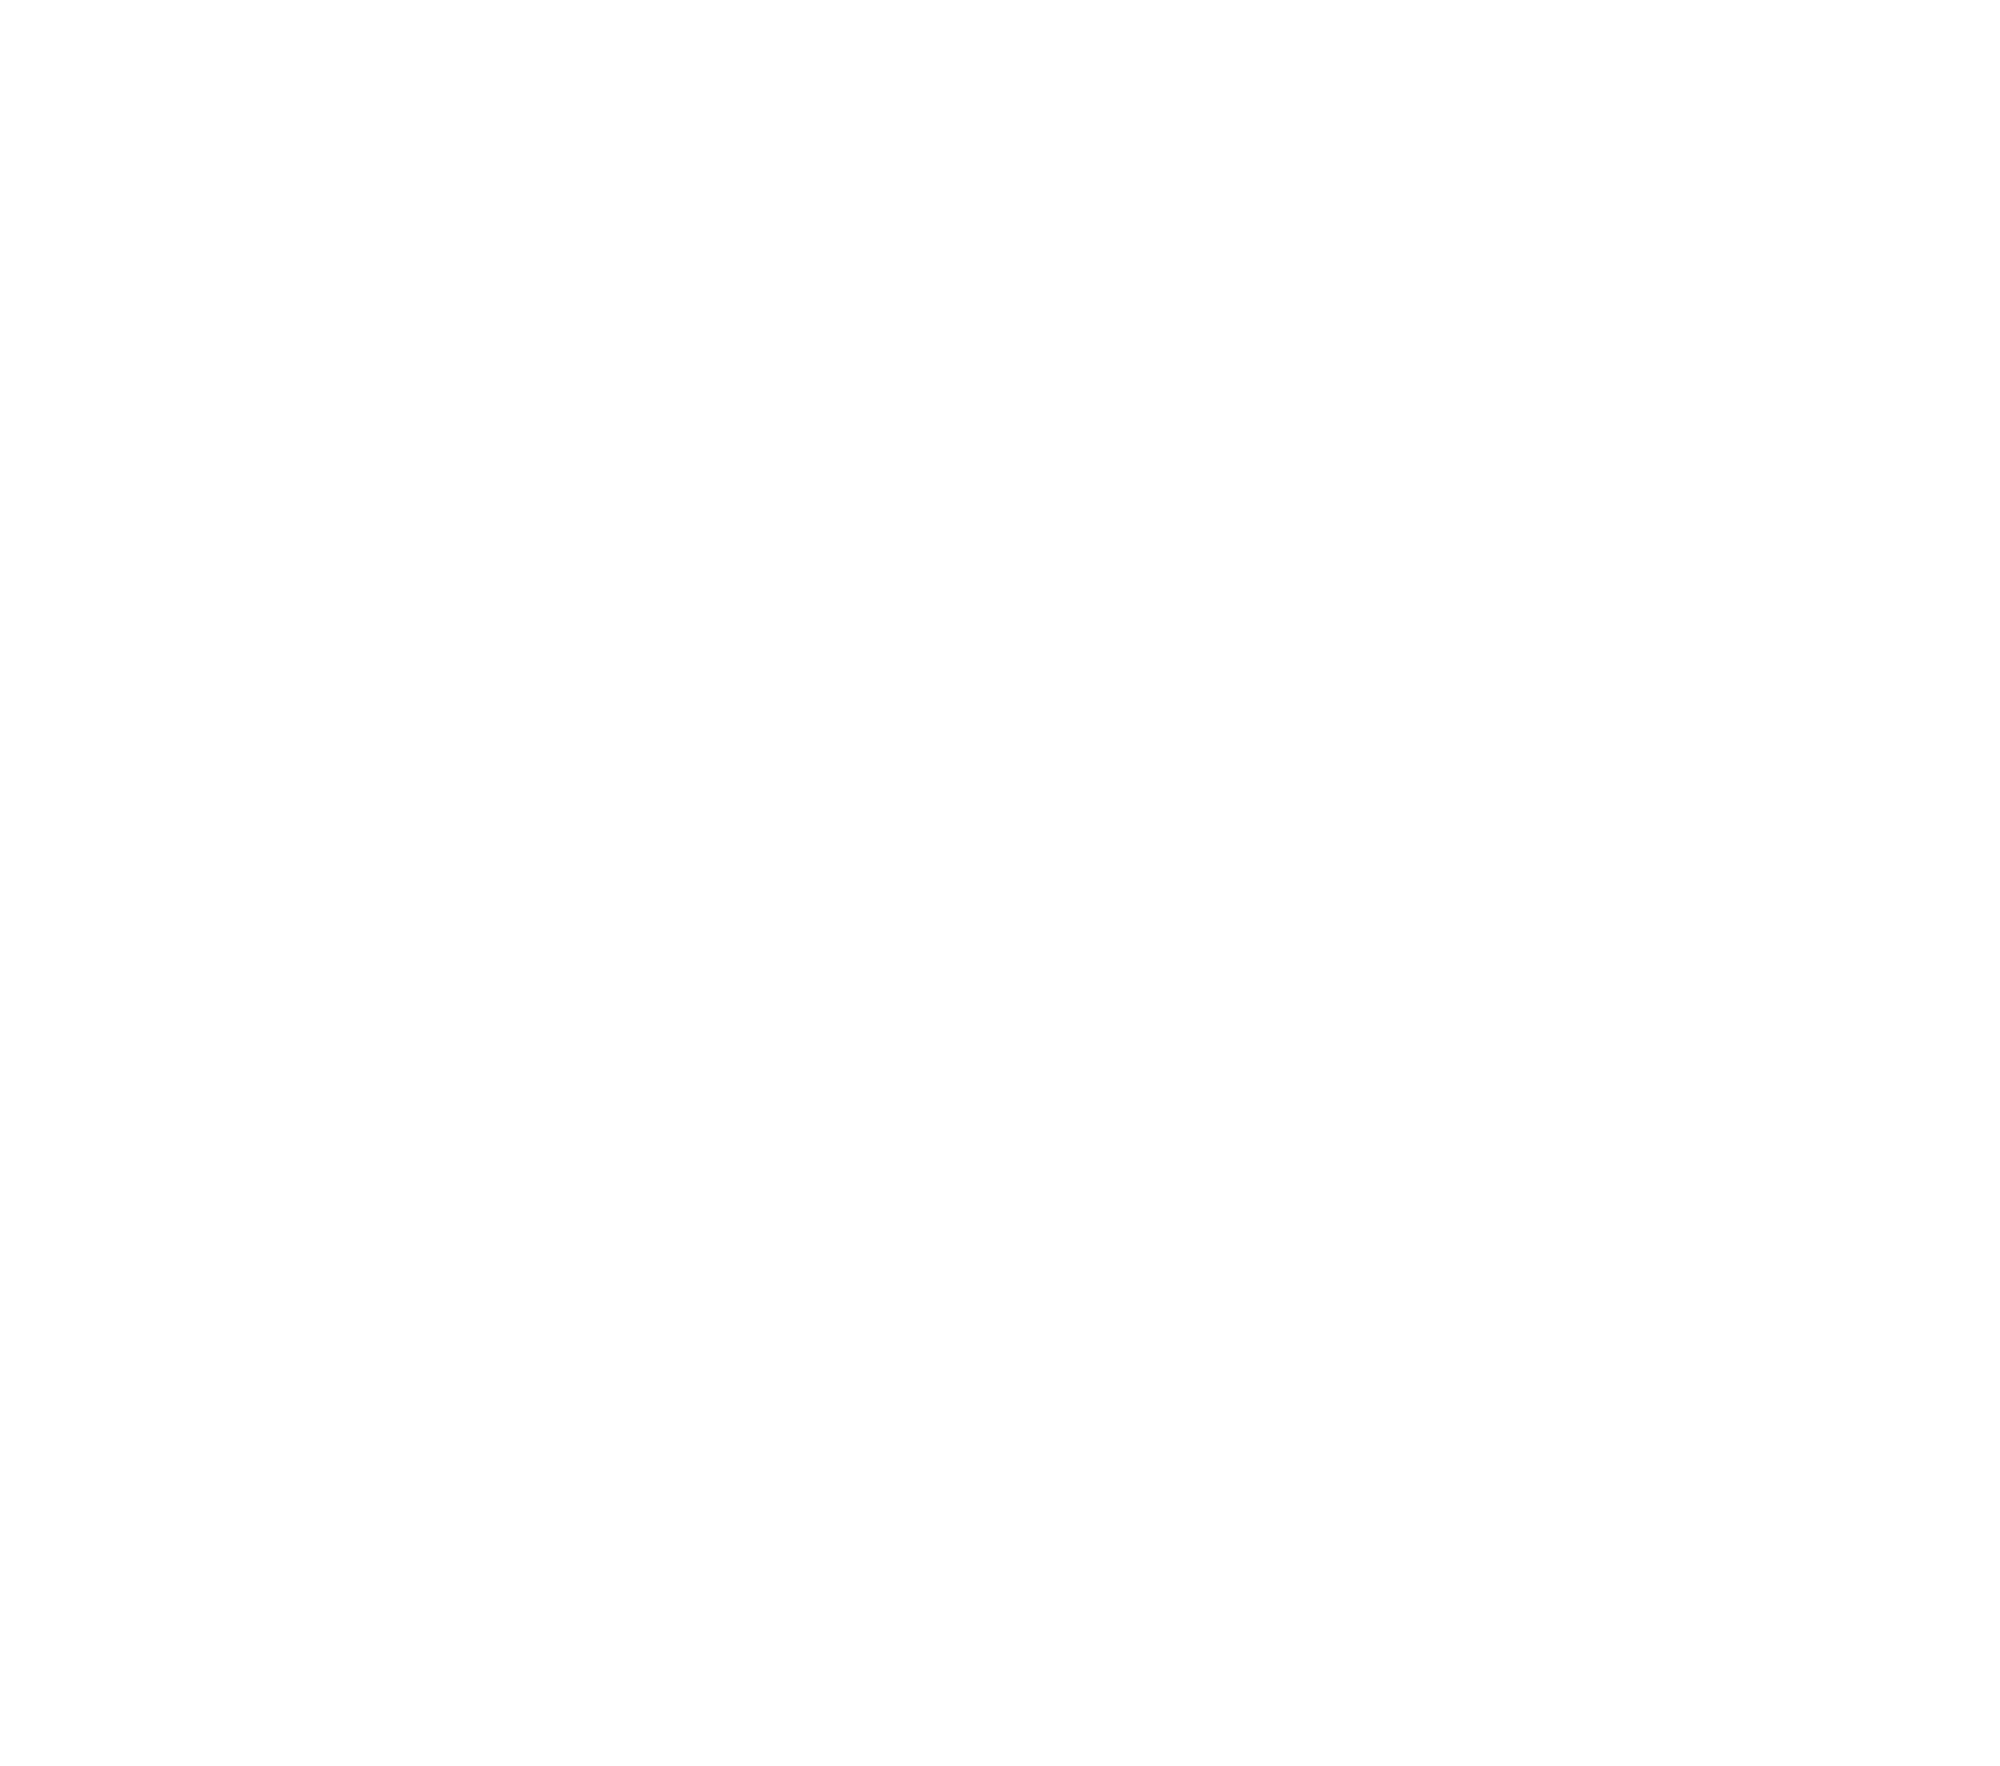 Jazz Singer hire for Weddings, Parties or Special Events.